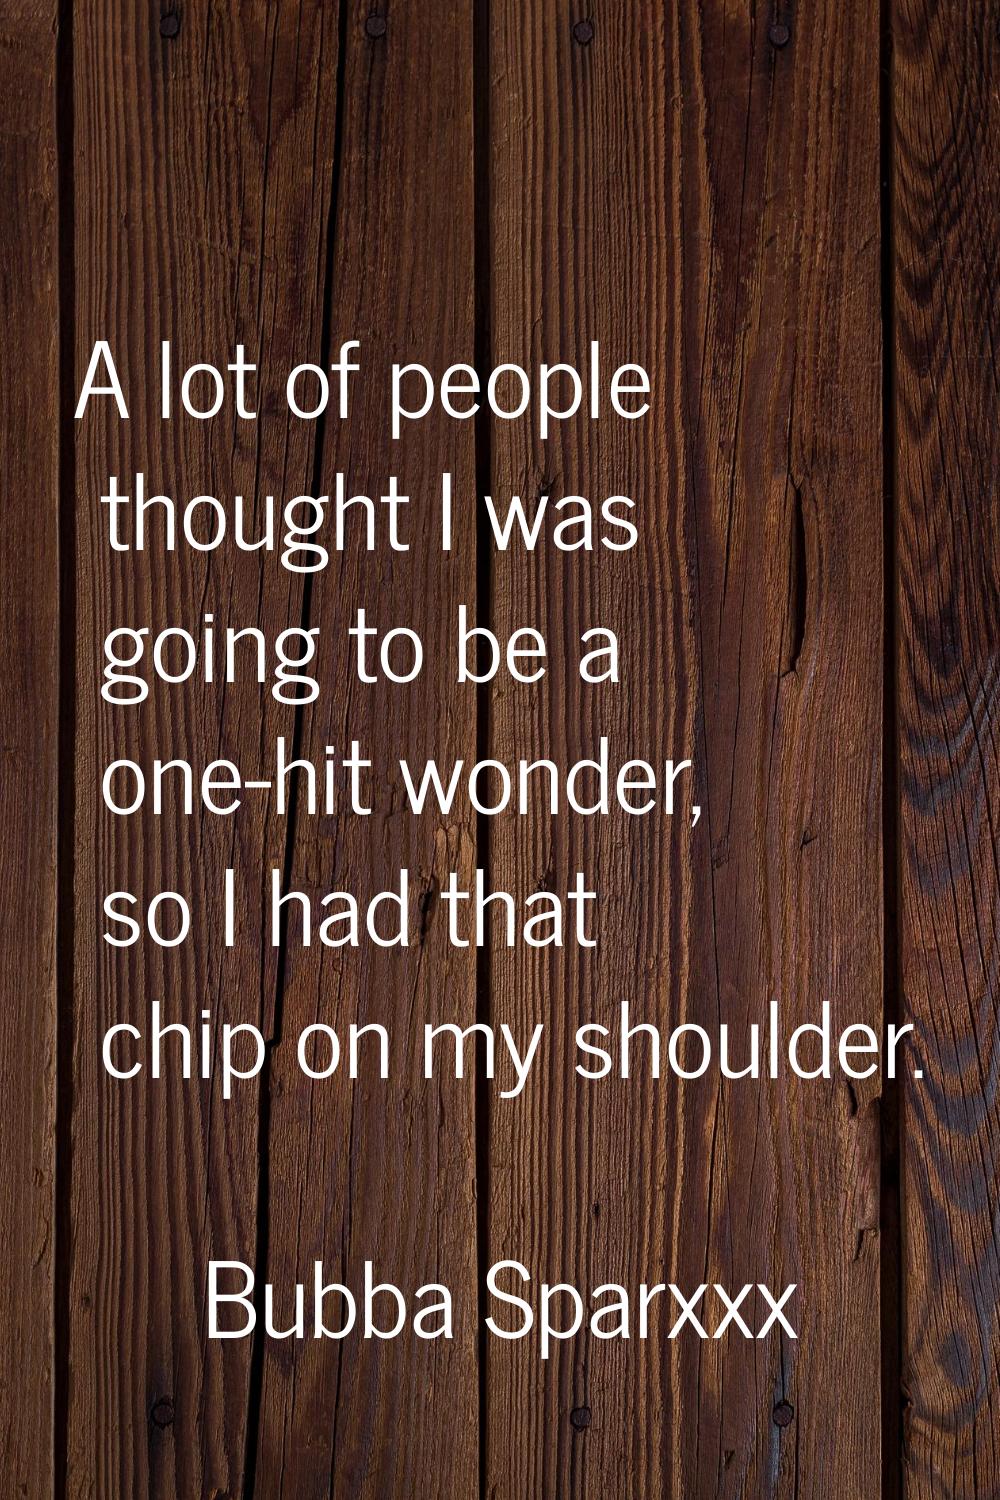 A lot of people thought I was going to be a one-hit wonder, so I had that chip on my shoulder.